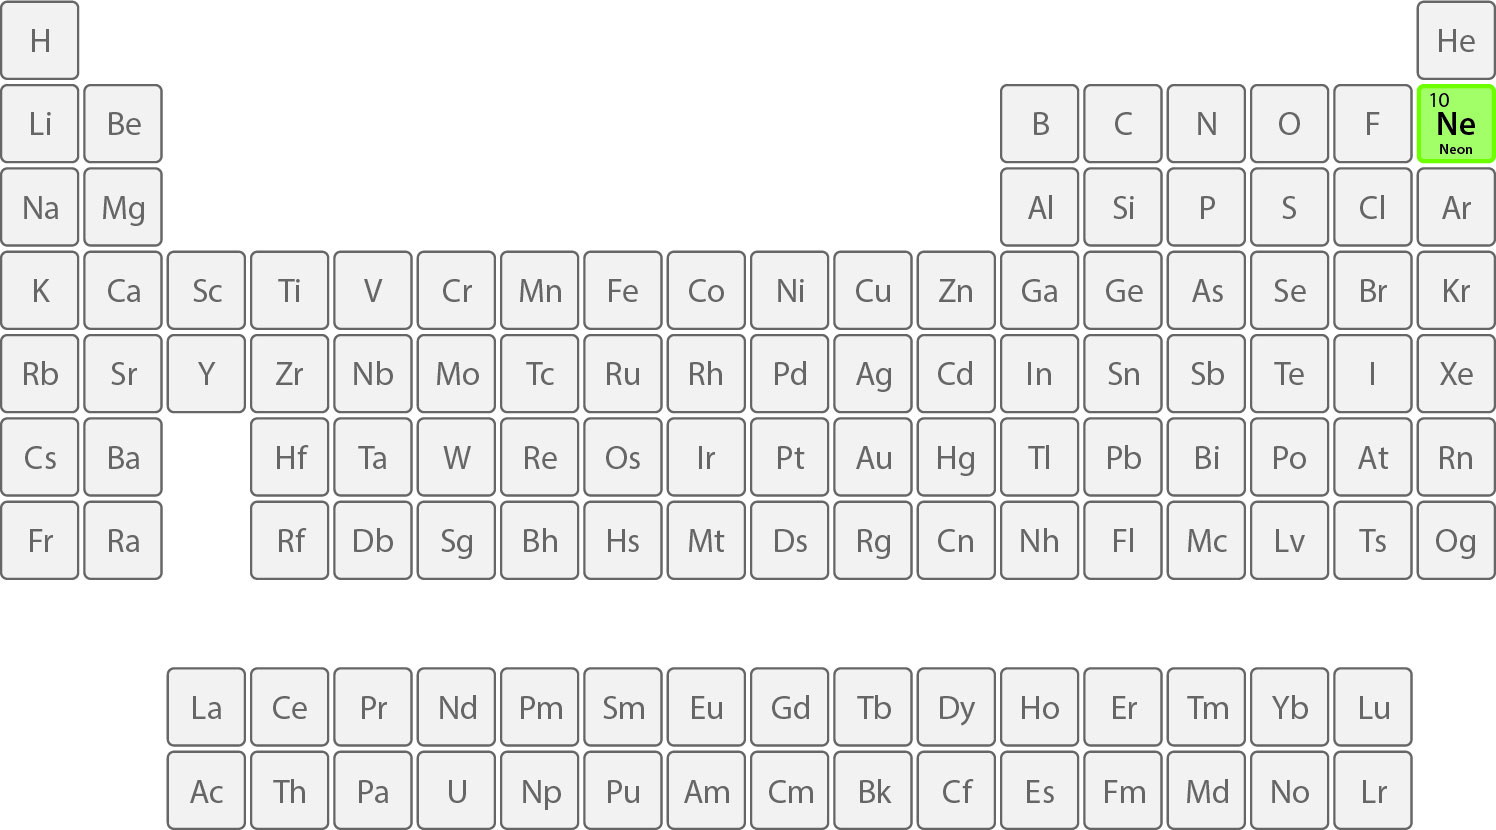 Neon on the periodic table